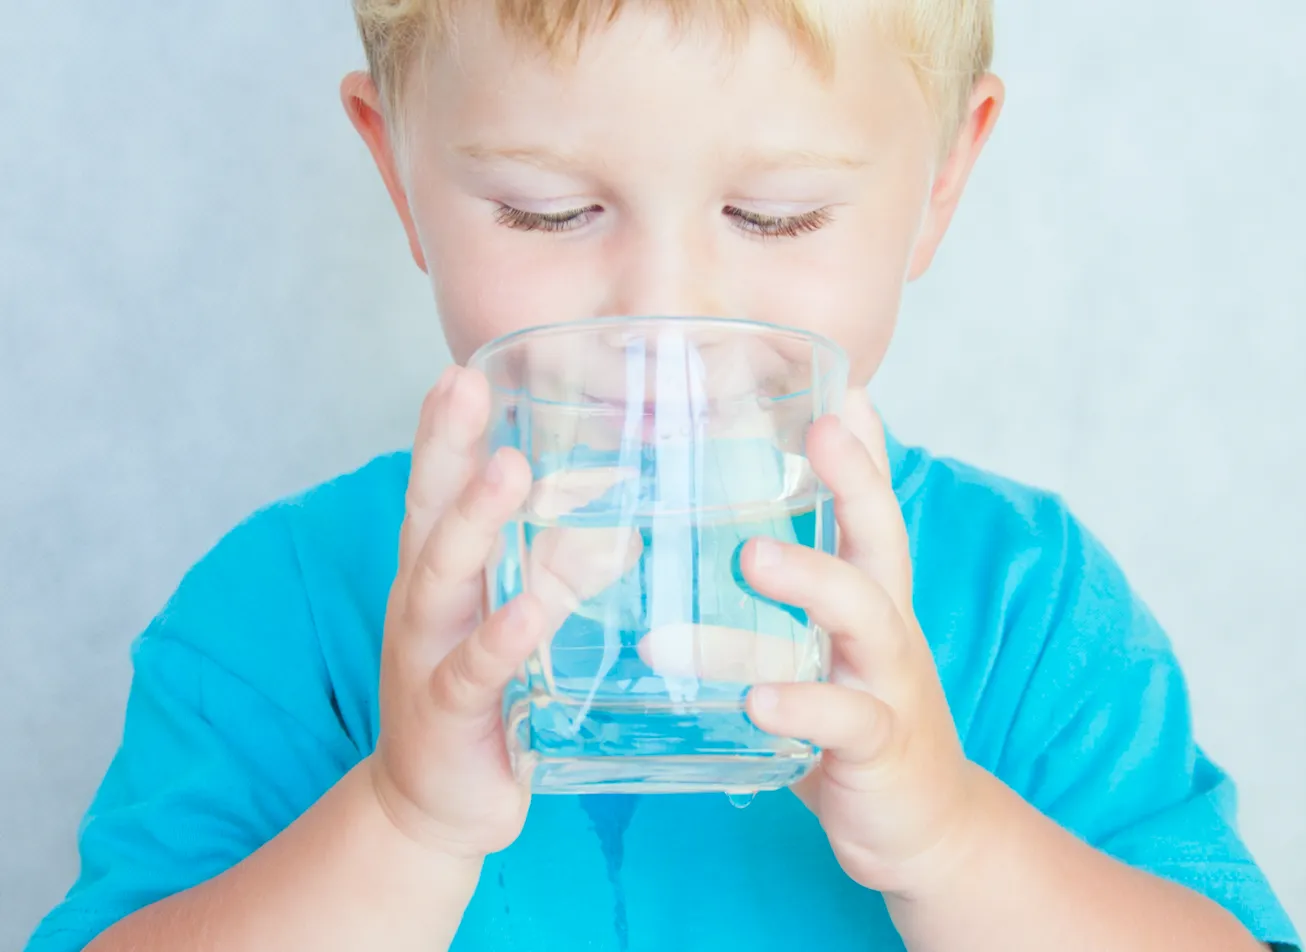 Harvard Study Confirms Fluoride ‘Significantly Lowers’ Children’s IQ